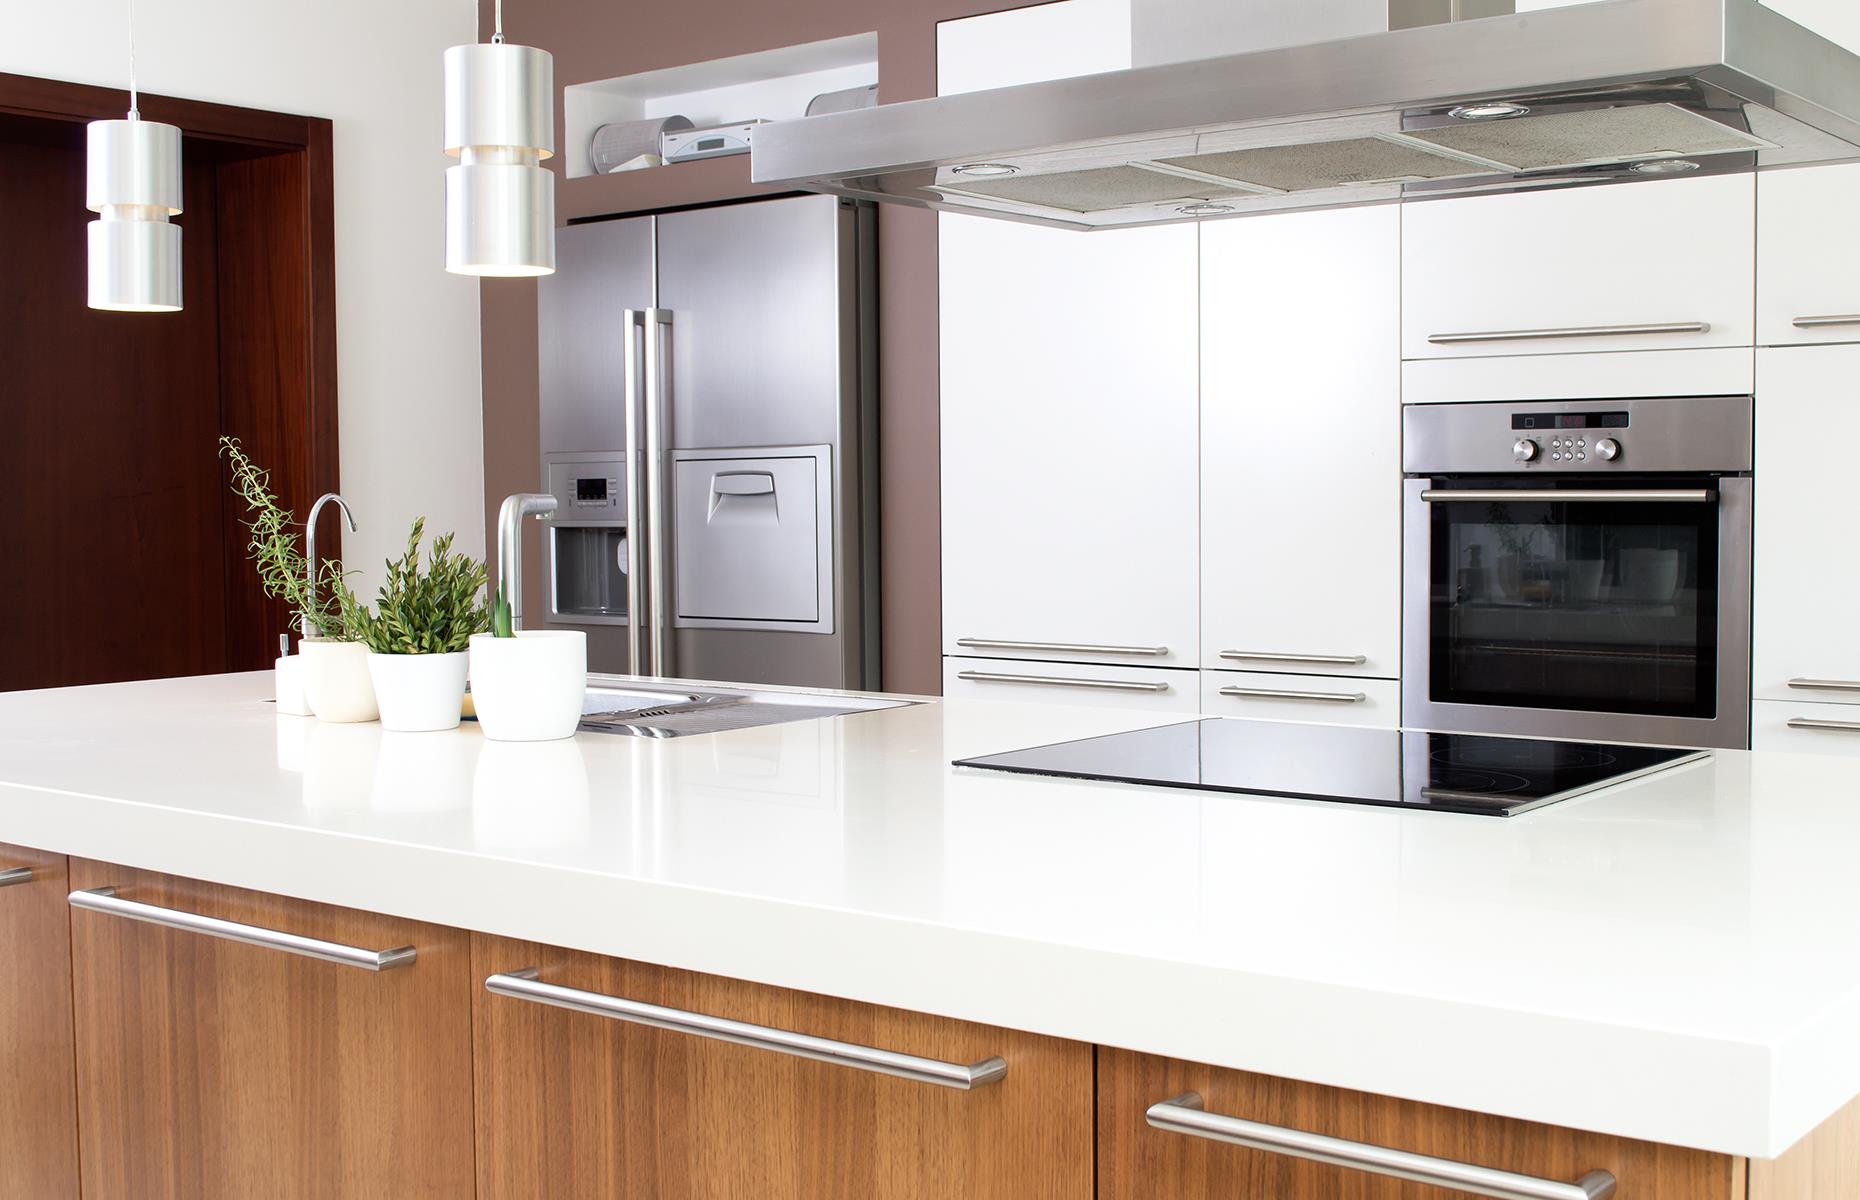 Good quality appliances not only make life just that touch easier on a day-to-day basis but they're also more stylish and more environmentally conscious. Plus, even the cheapest options cost a fair amount, so if you can splash out on something that will last with a long guarantee, it's worth it.